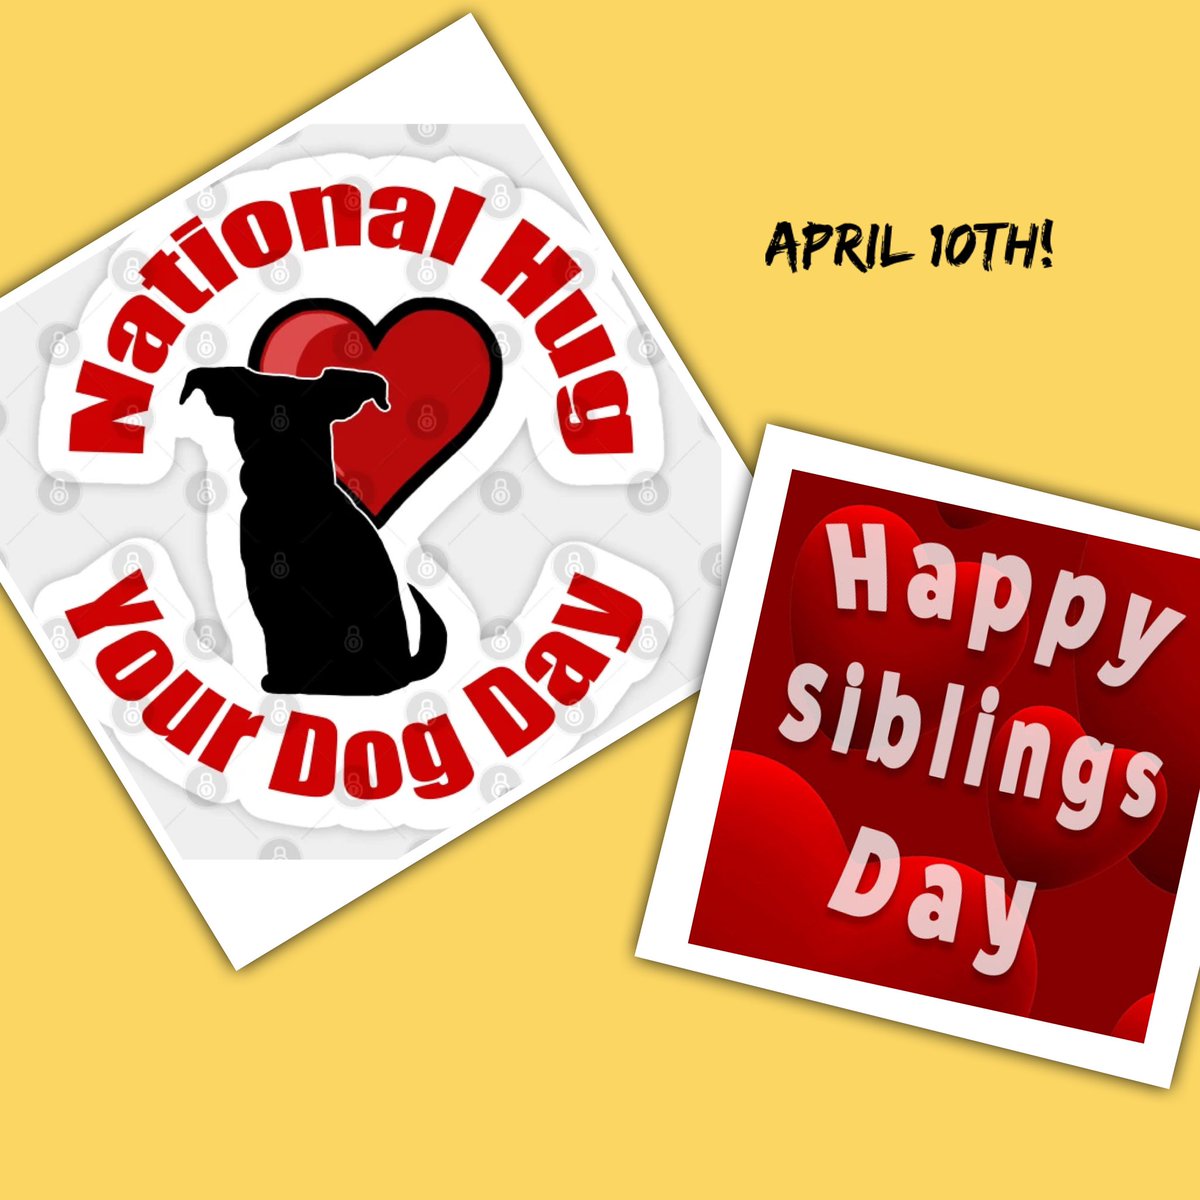 Hug your dog or your siblings ?! Take your pick ! It’s a day to celebrate both ! #hugyourdog #siblinglove #gwr @GarciaBeProud @Pak_Org_ @Finnegan_Team @Tustin2Crush @ATT